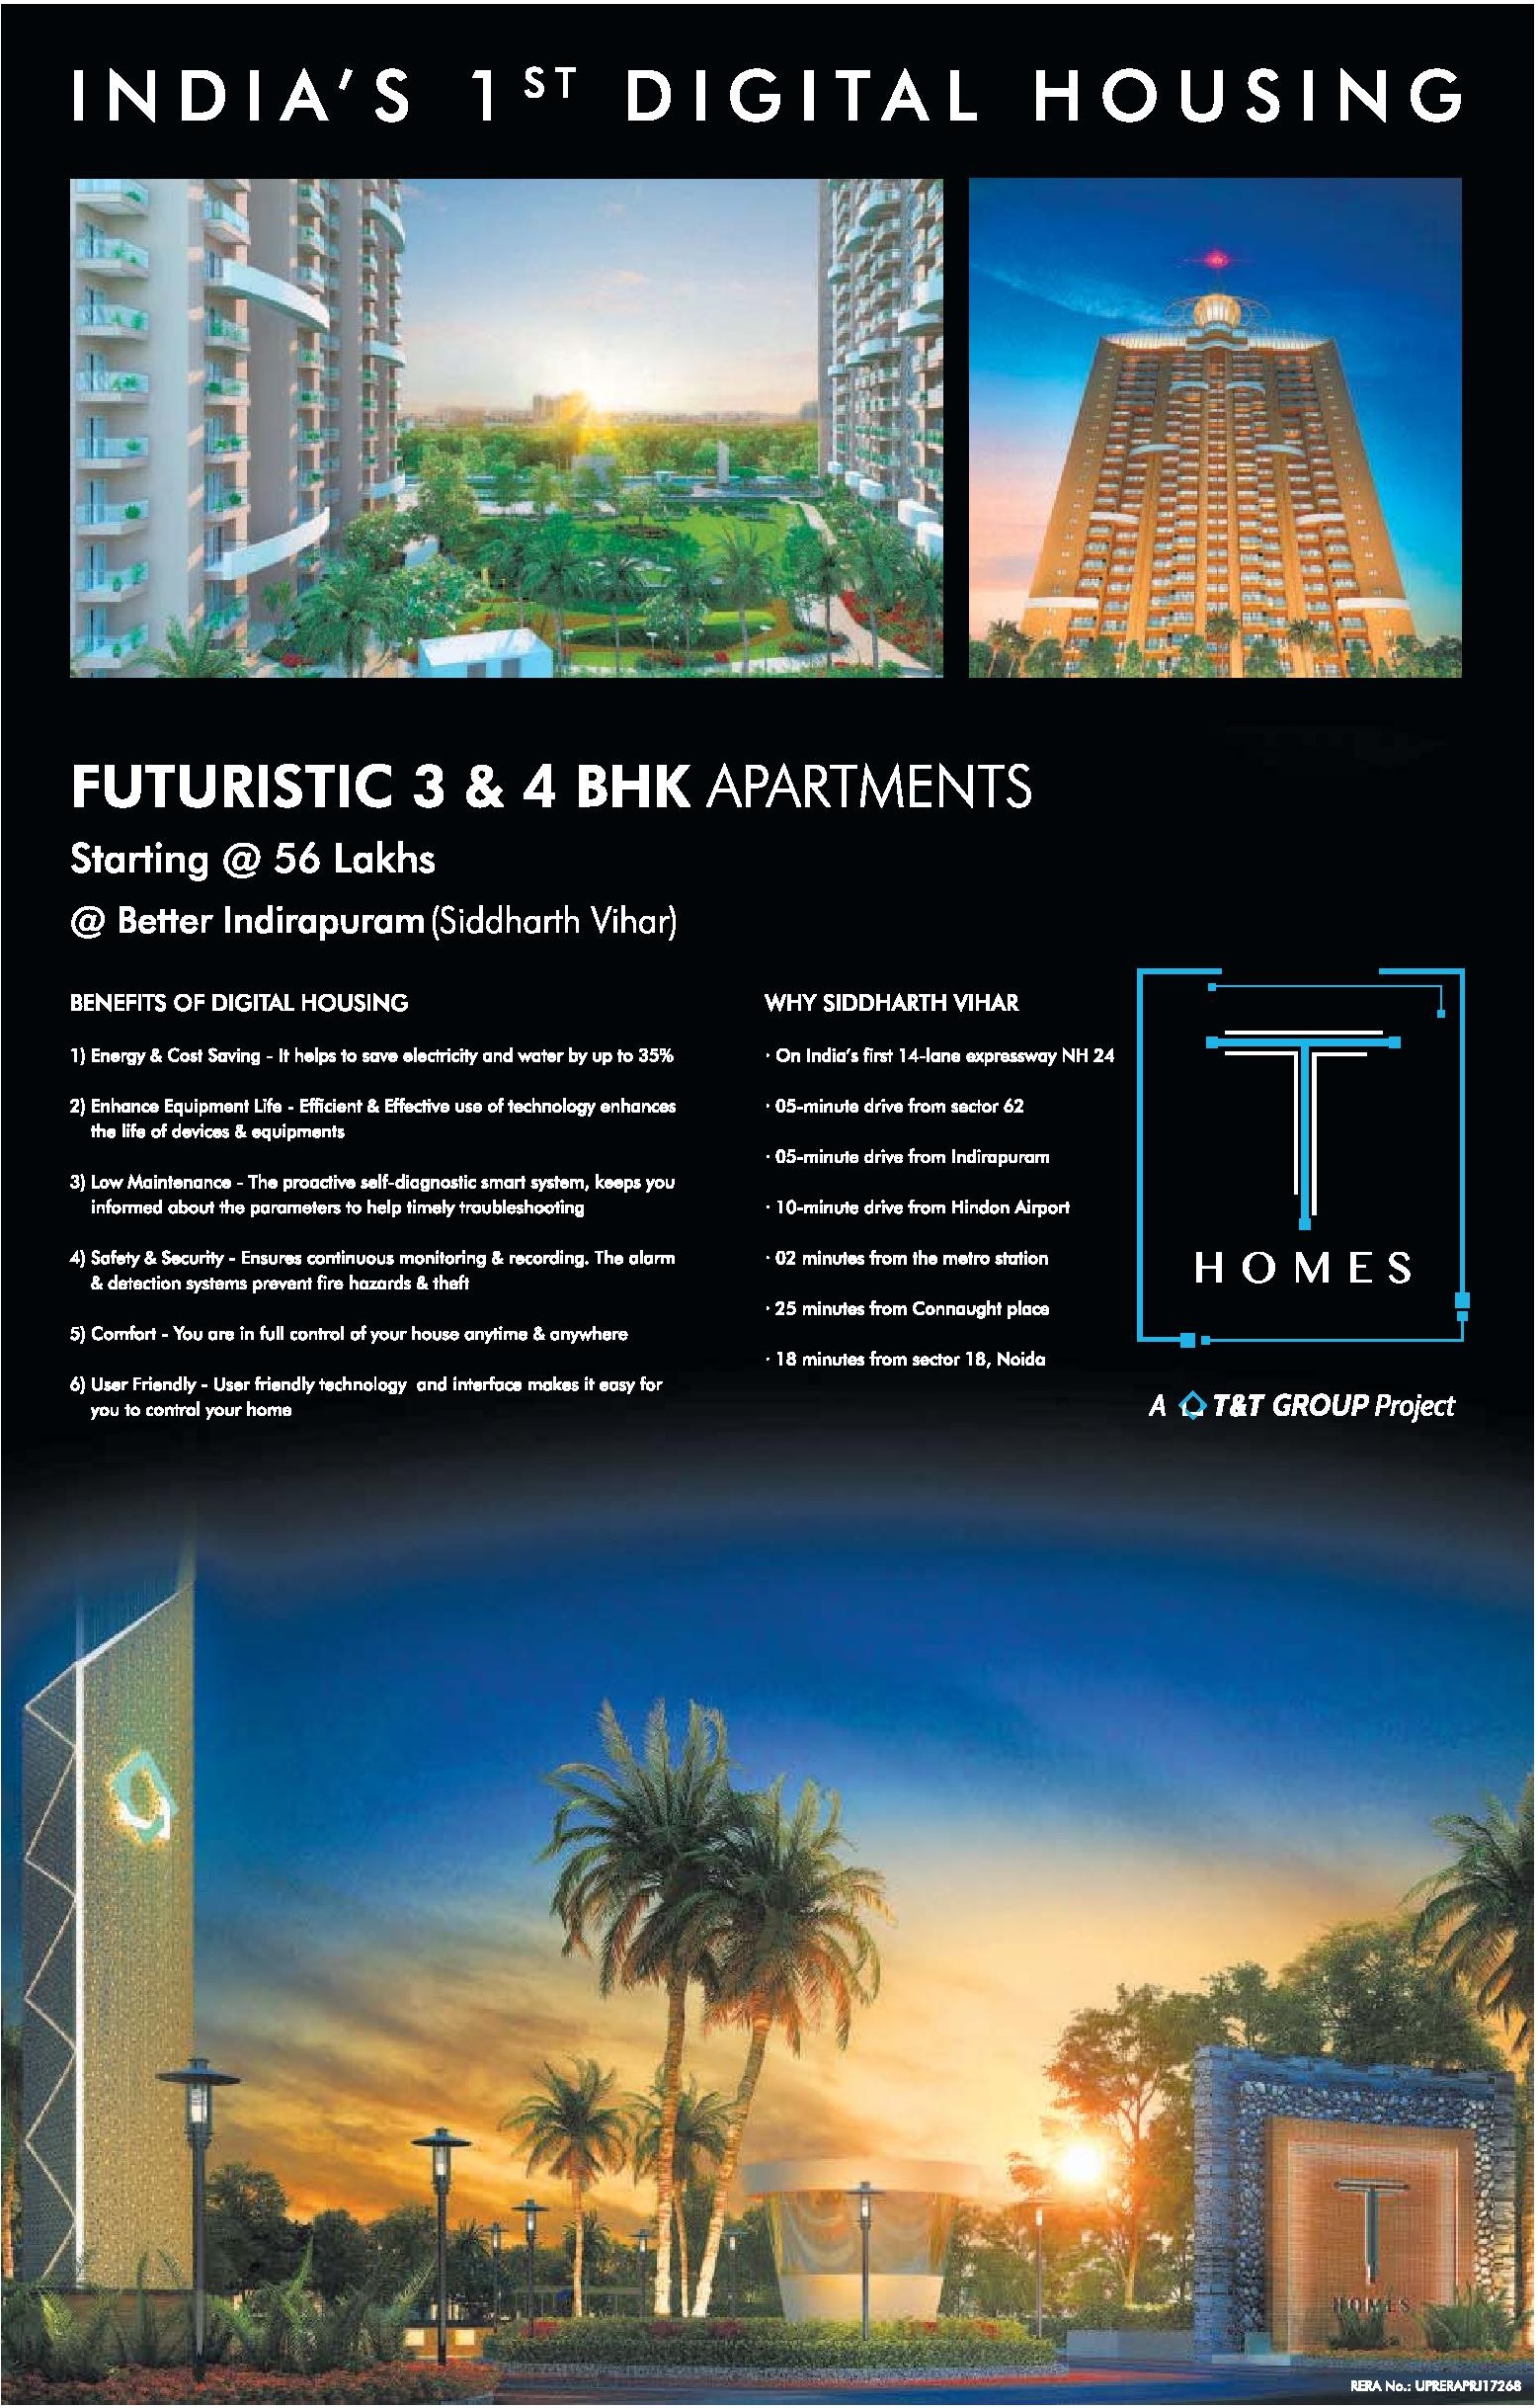 Book futuristic 3 & 4 bhk apartments @ Rs. 56 lakhs at T Homes in Ghaziabad Update